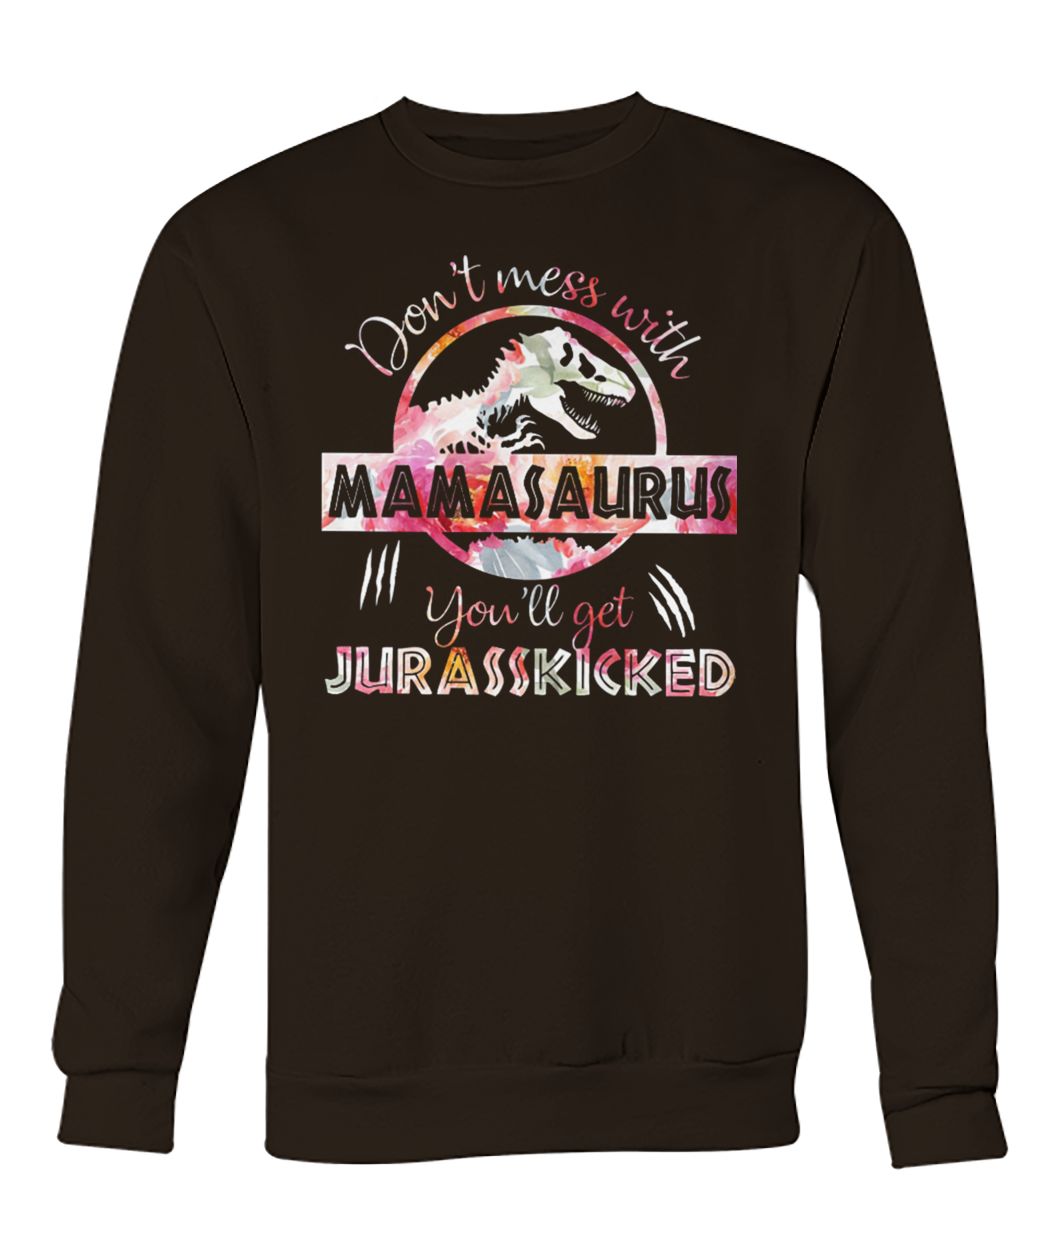 Don't mess with mamasaurus you'll get jurasskicked floral crew neck sweatshirt